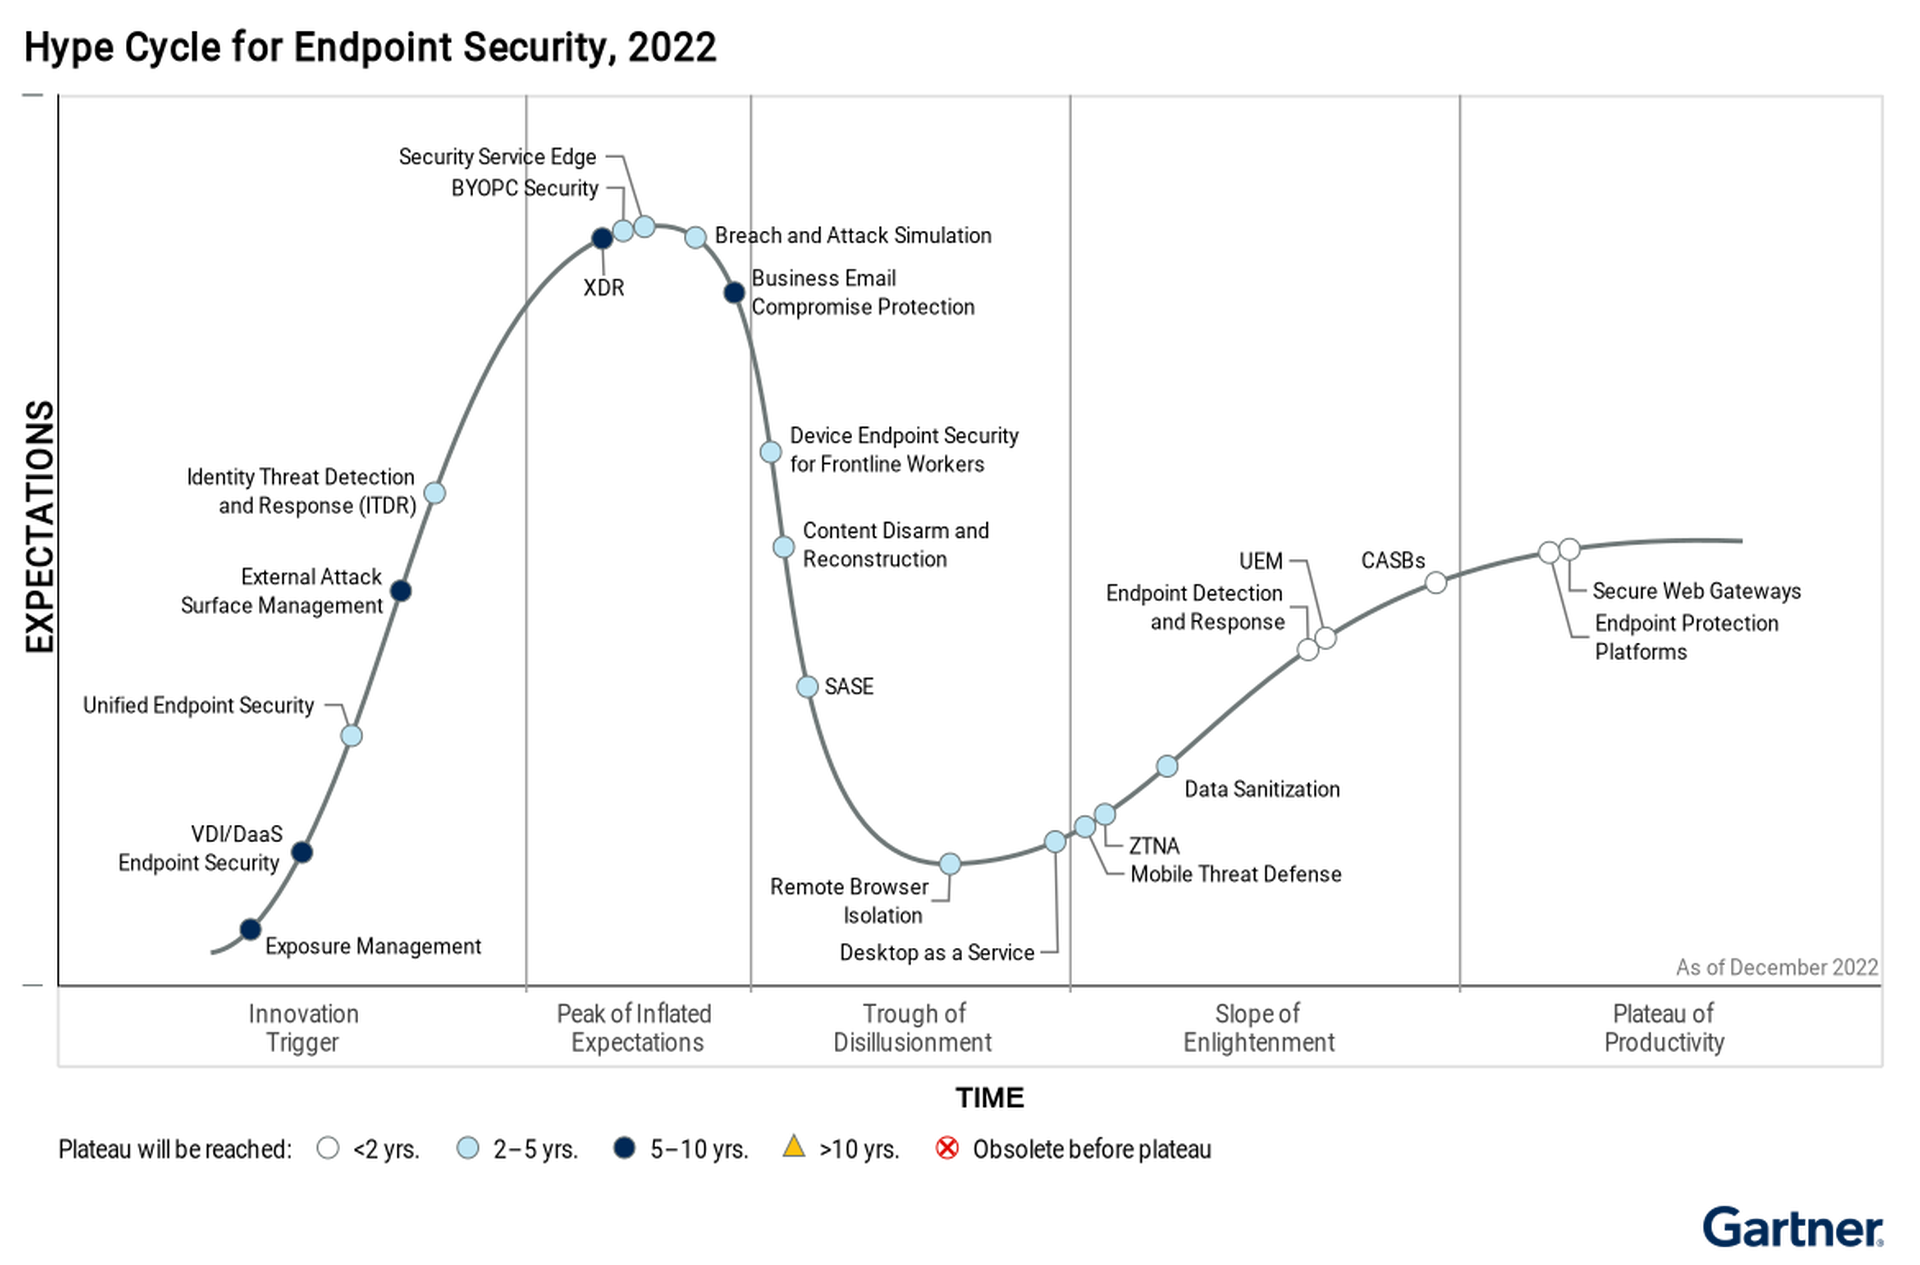 Gartner Hype Cycle for Endpoint Security, 2022